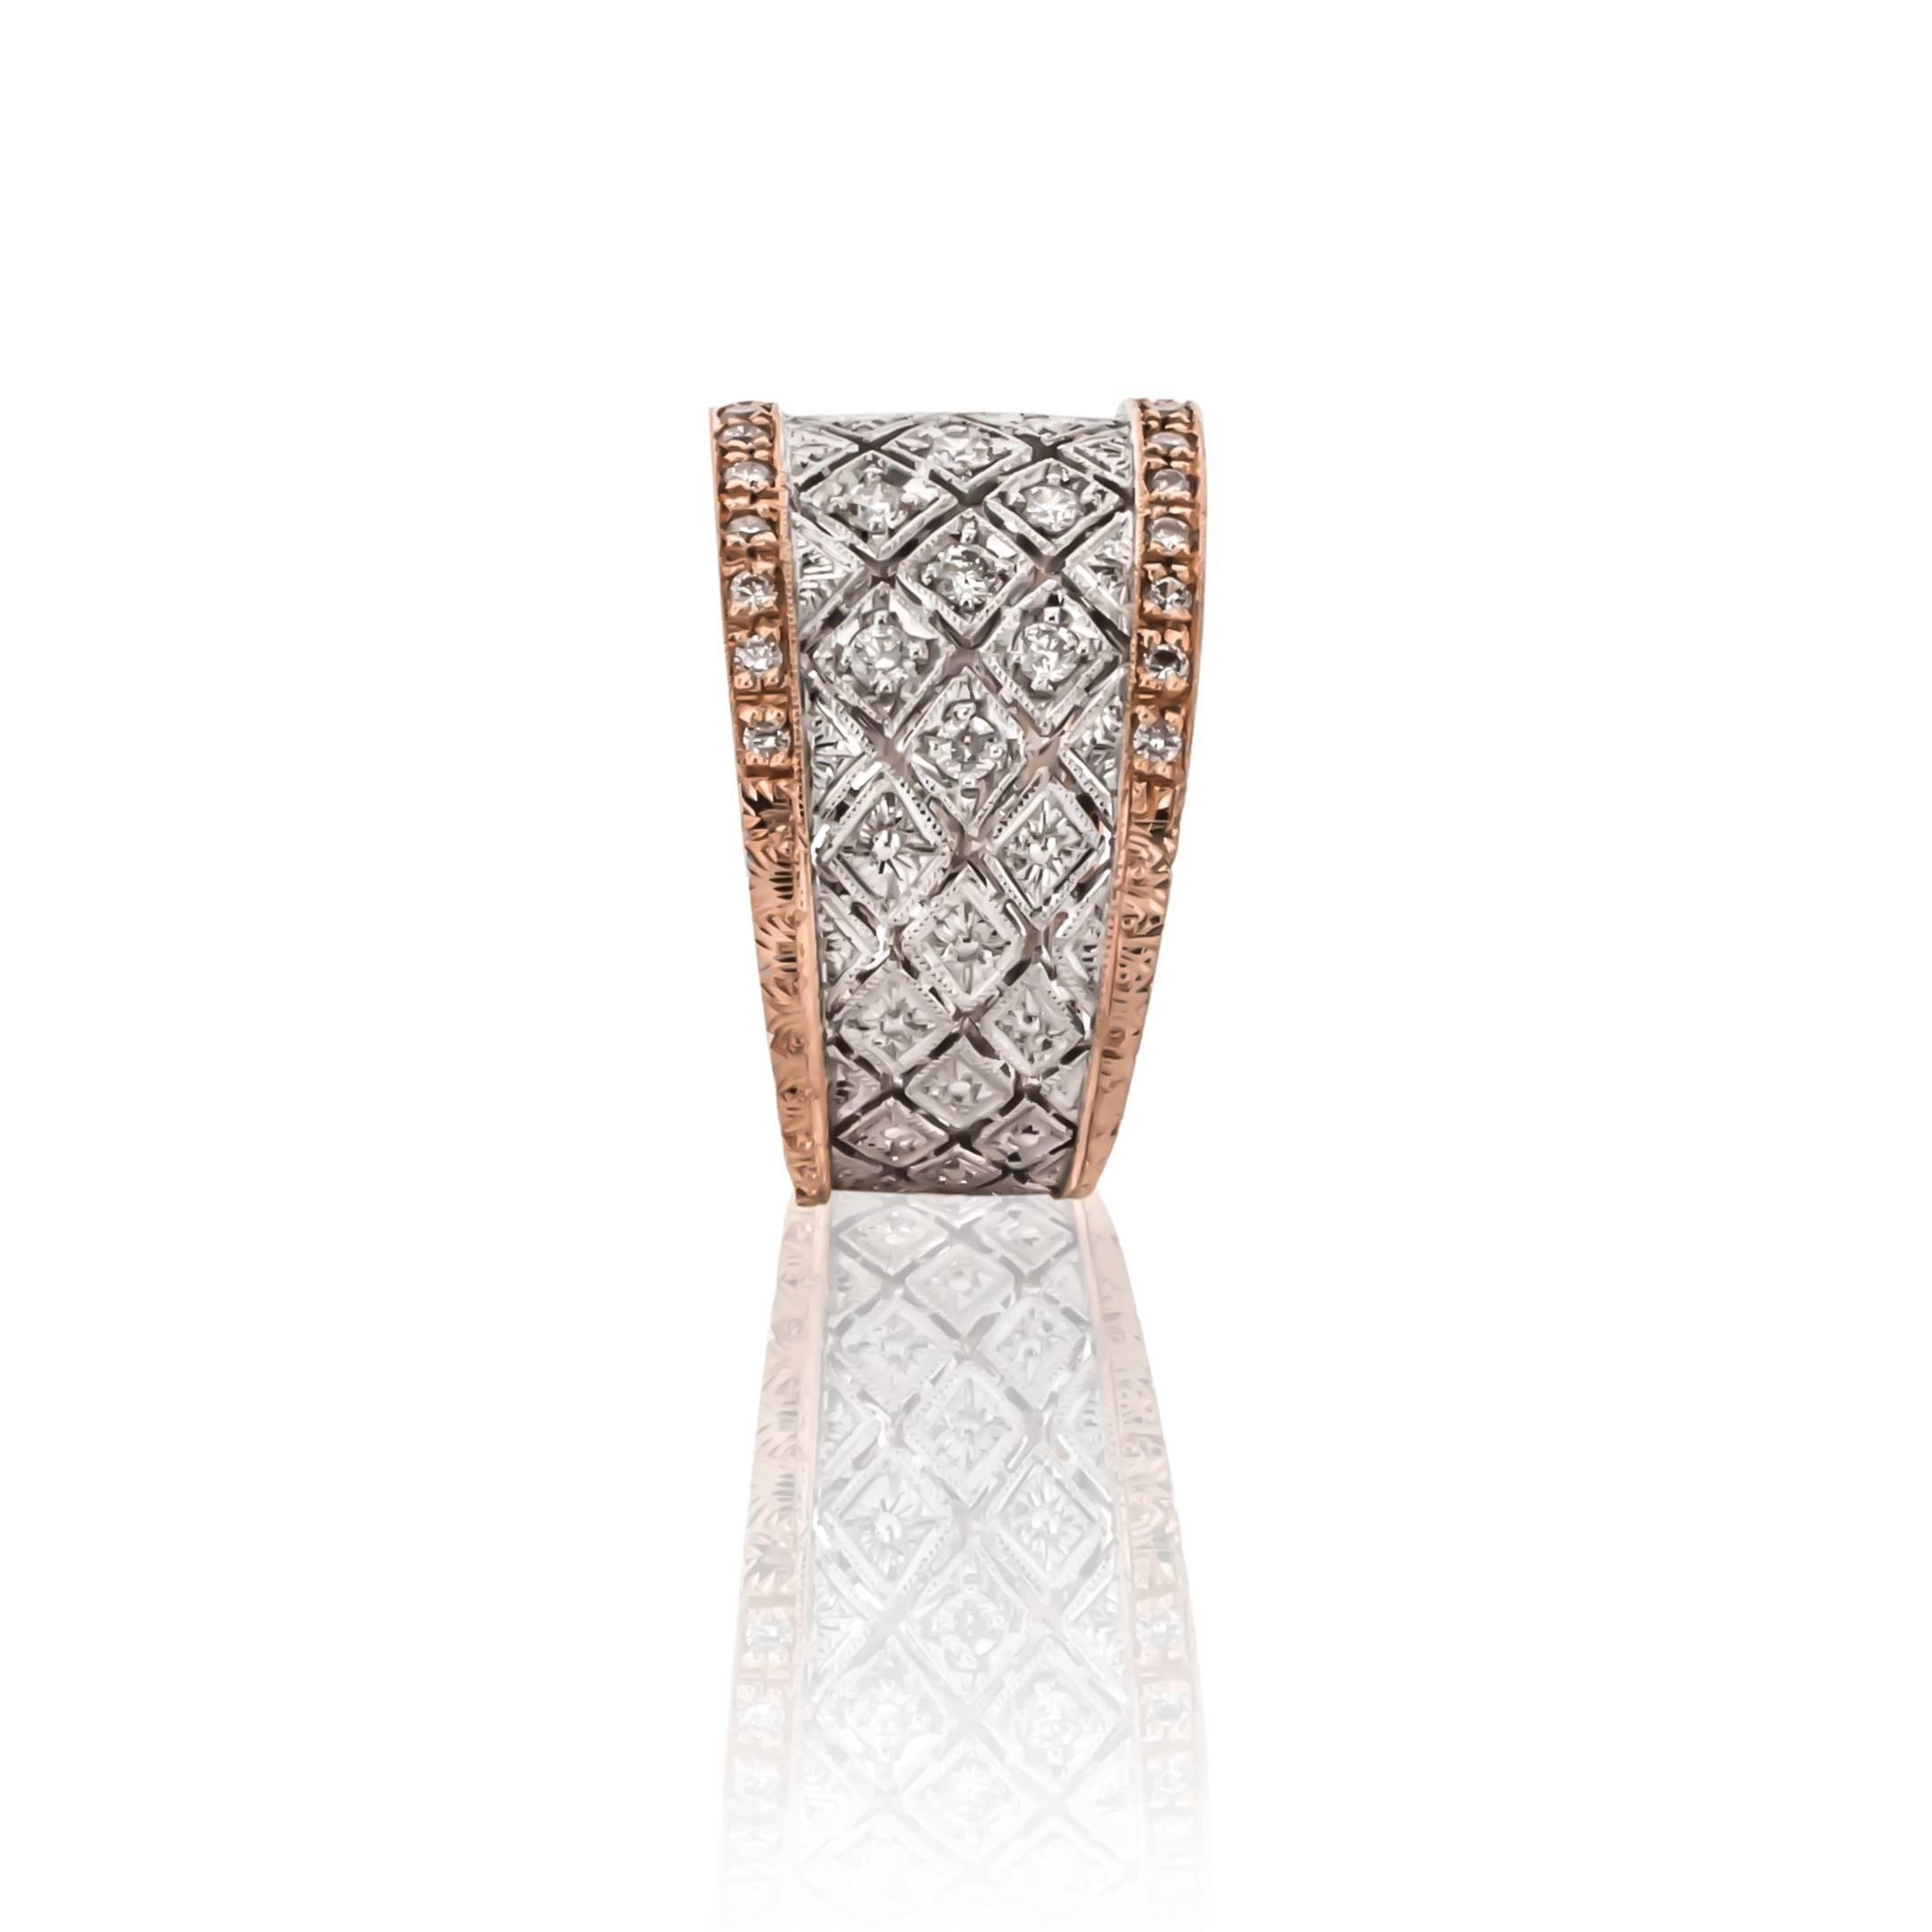 18K white and rose gold diamond ring, designed by F Vergano.  Set with round brilliant cut diamonds weighing .59 carats total weight, F-G color and VS clarity.

Finger size 7.